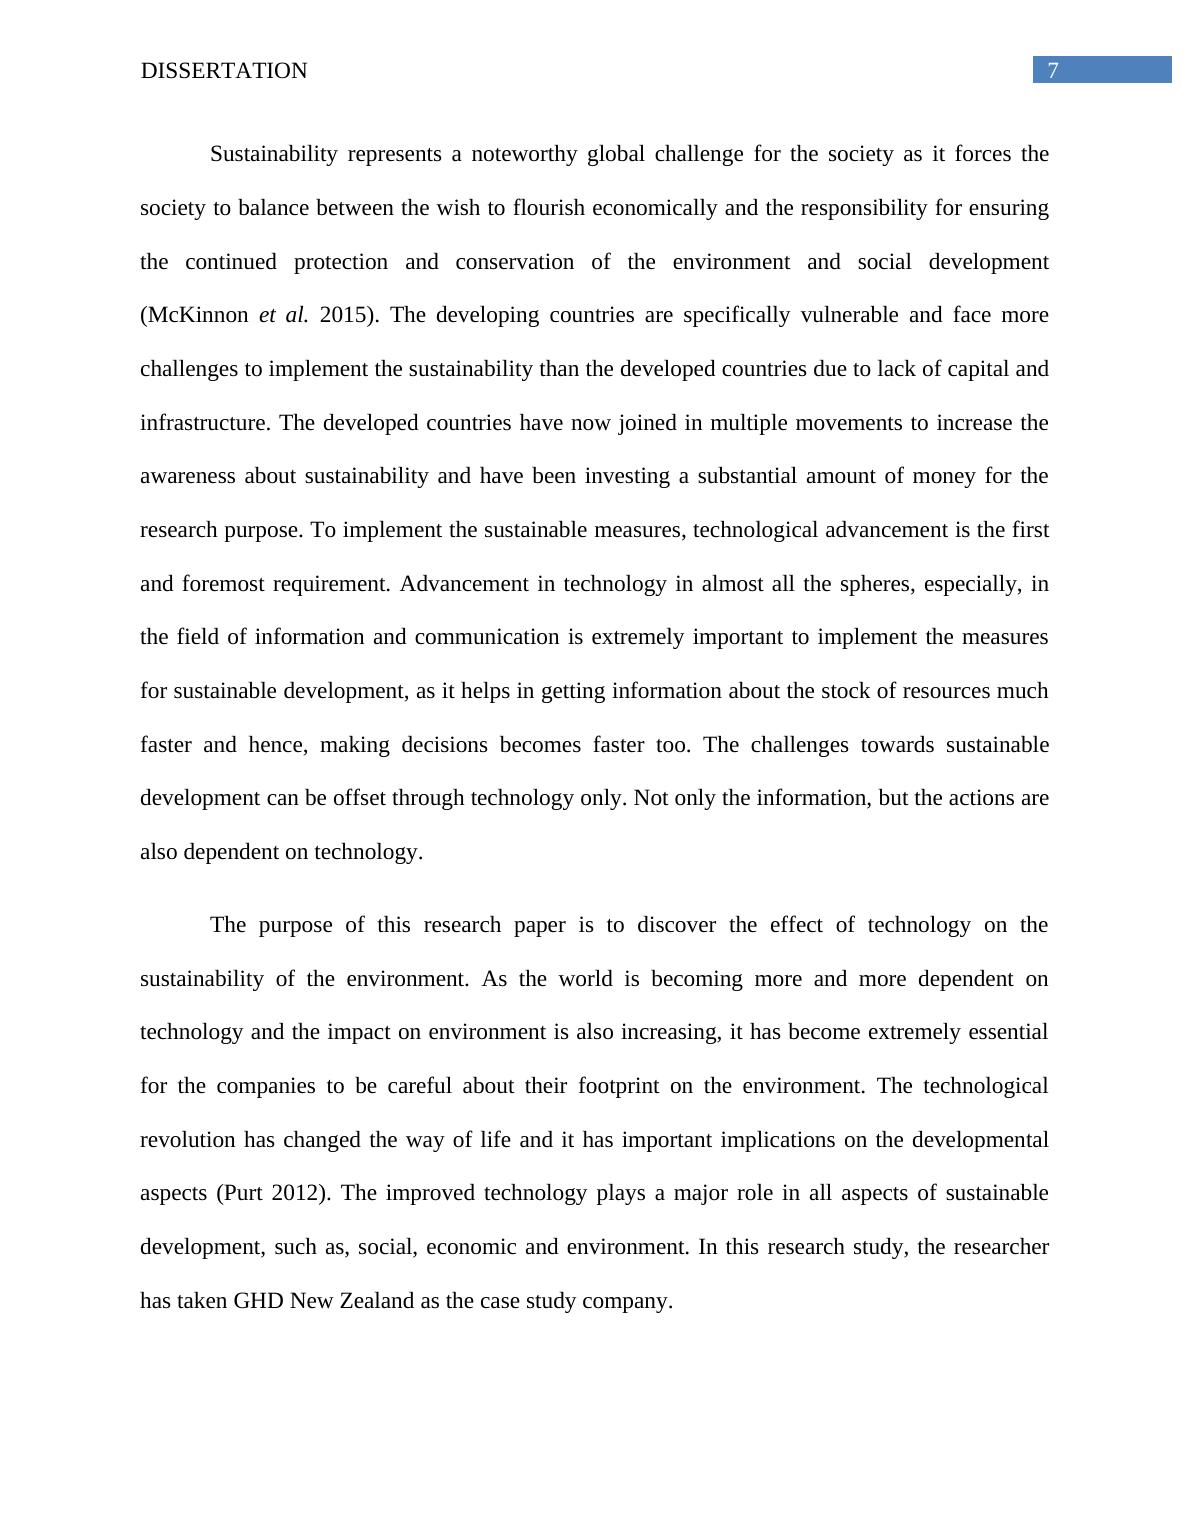 Effect of technology on environmental sustainability - A case study of GHD, New Zealand Author note: Acknowledgement_8